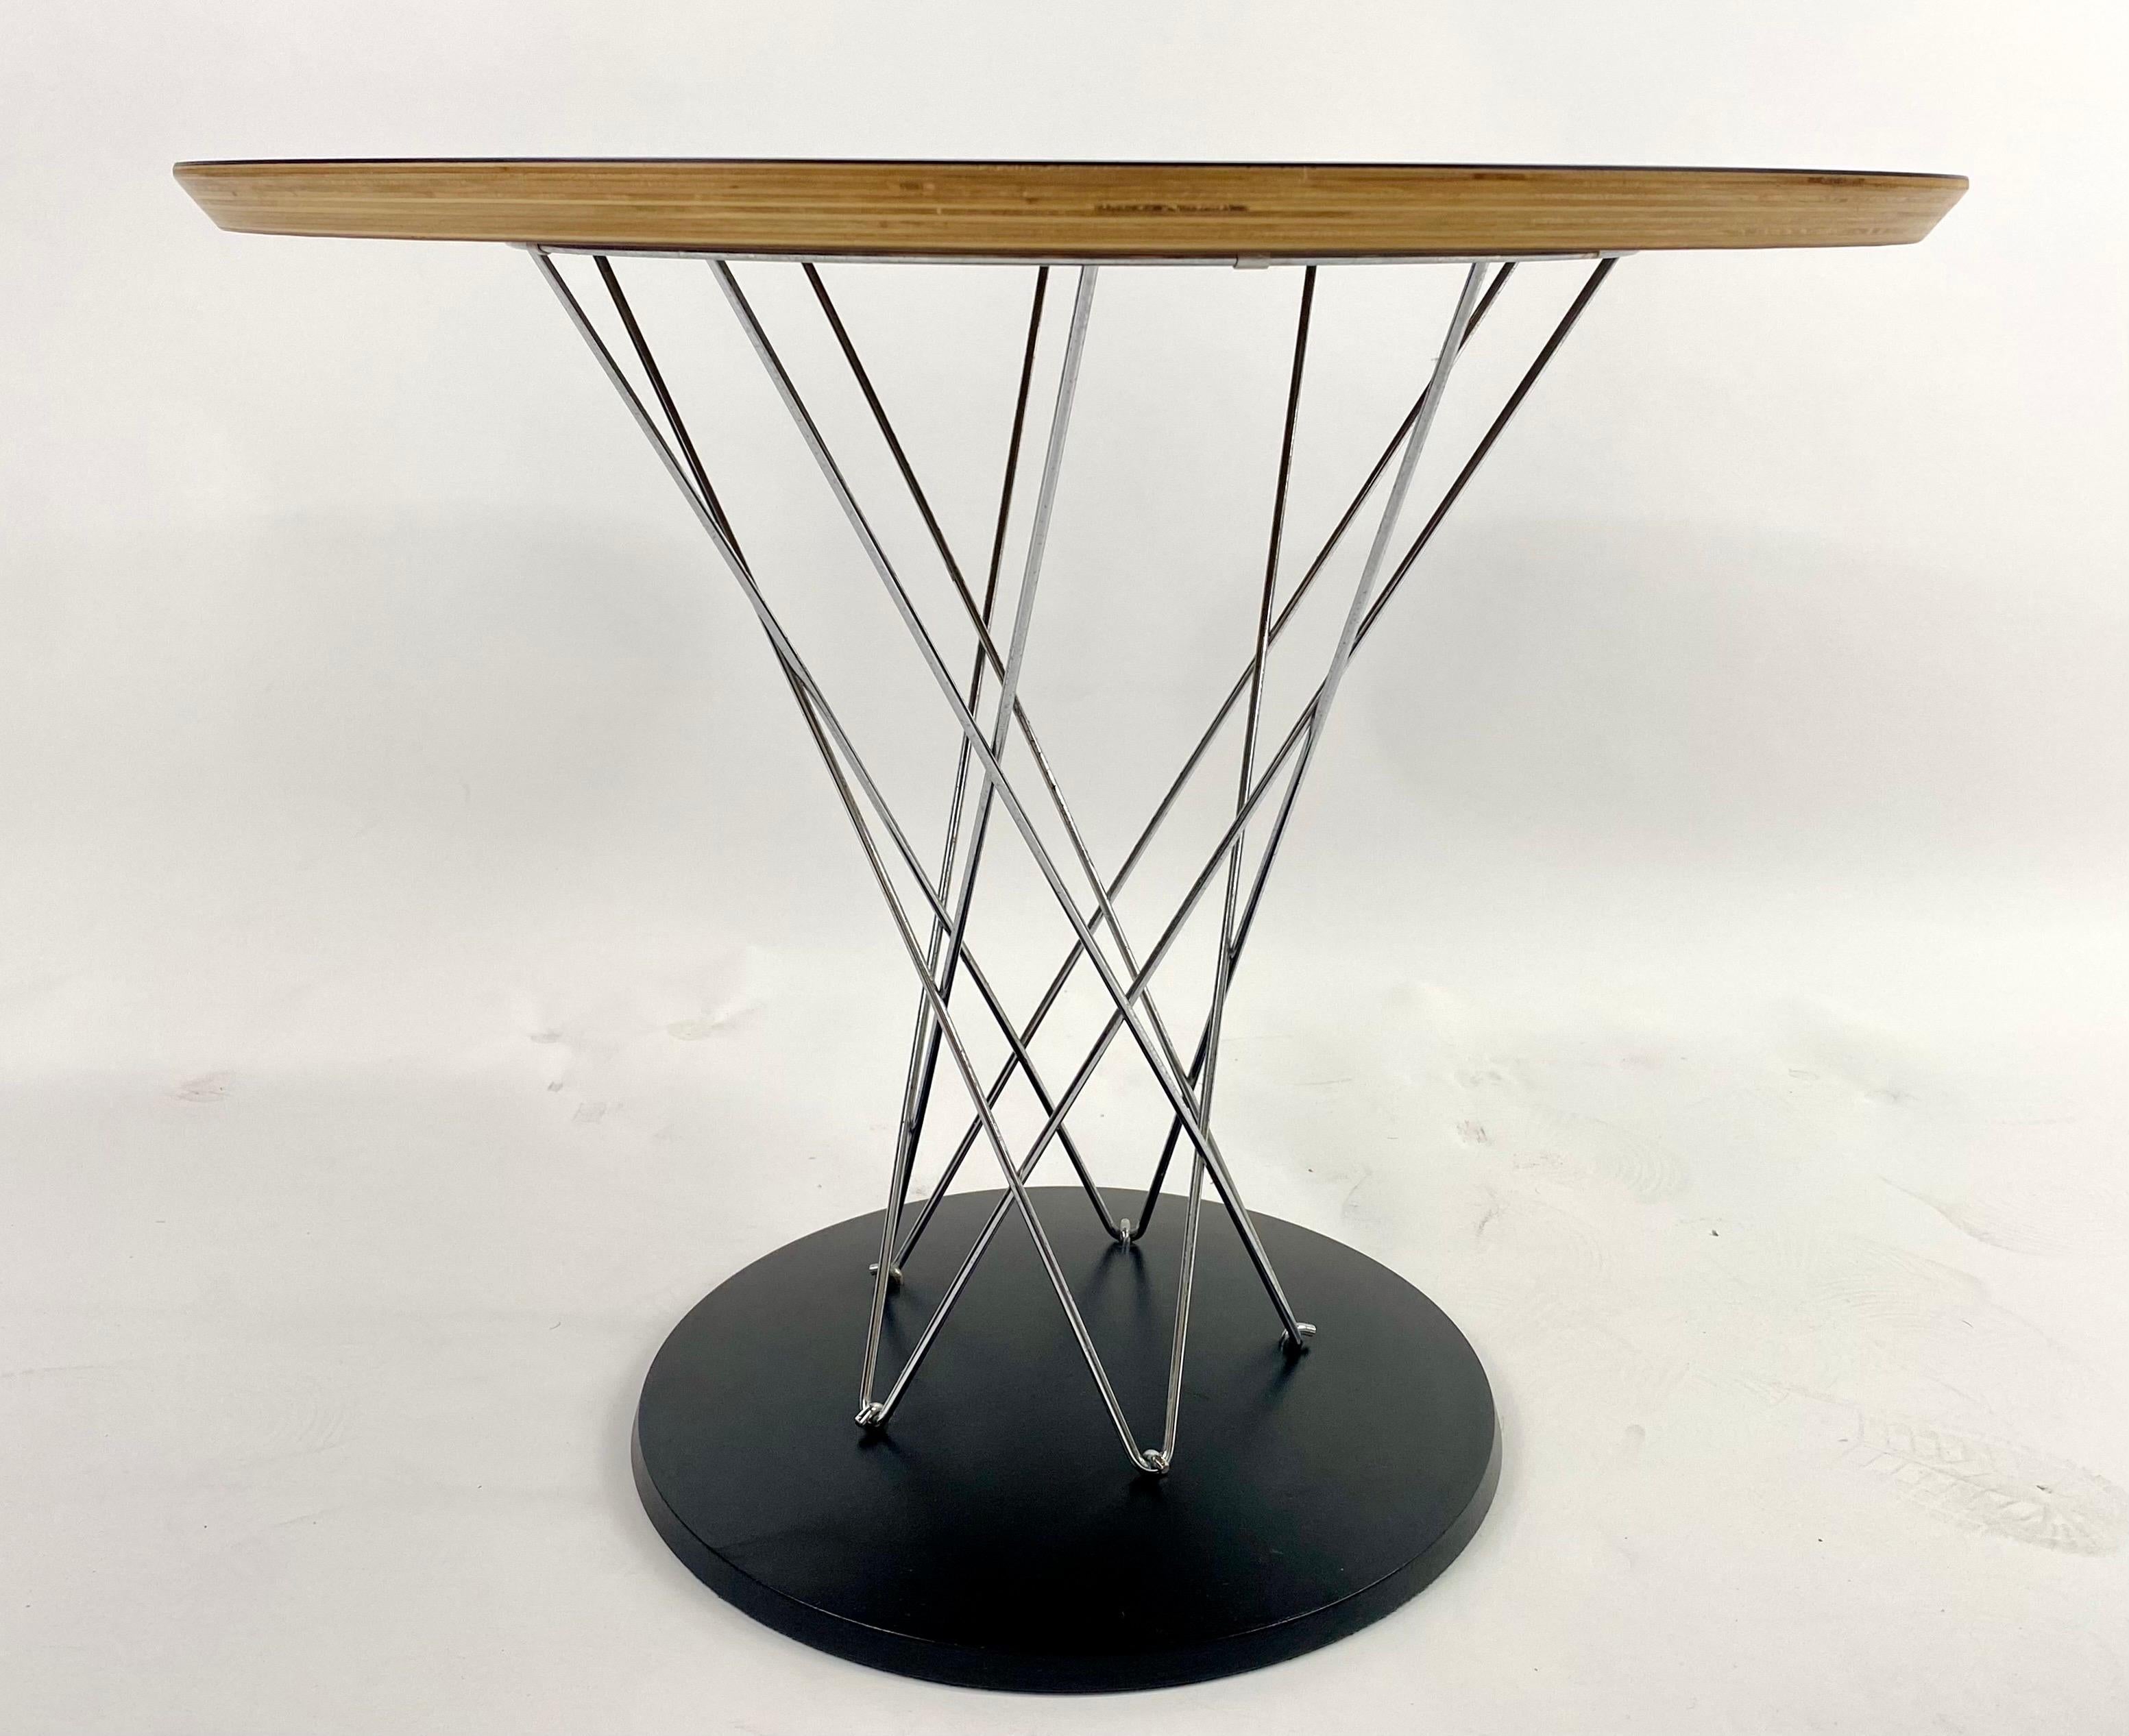 Laminated Isamu Noguchi Cyclone End Table for Knoll, MCM Black Laminate and Chrome, Signed